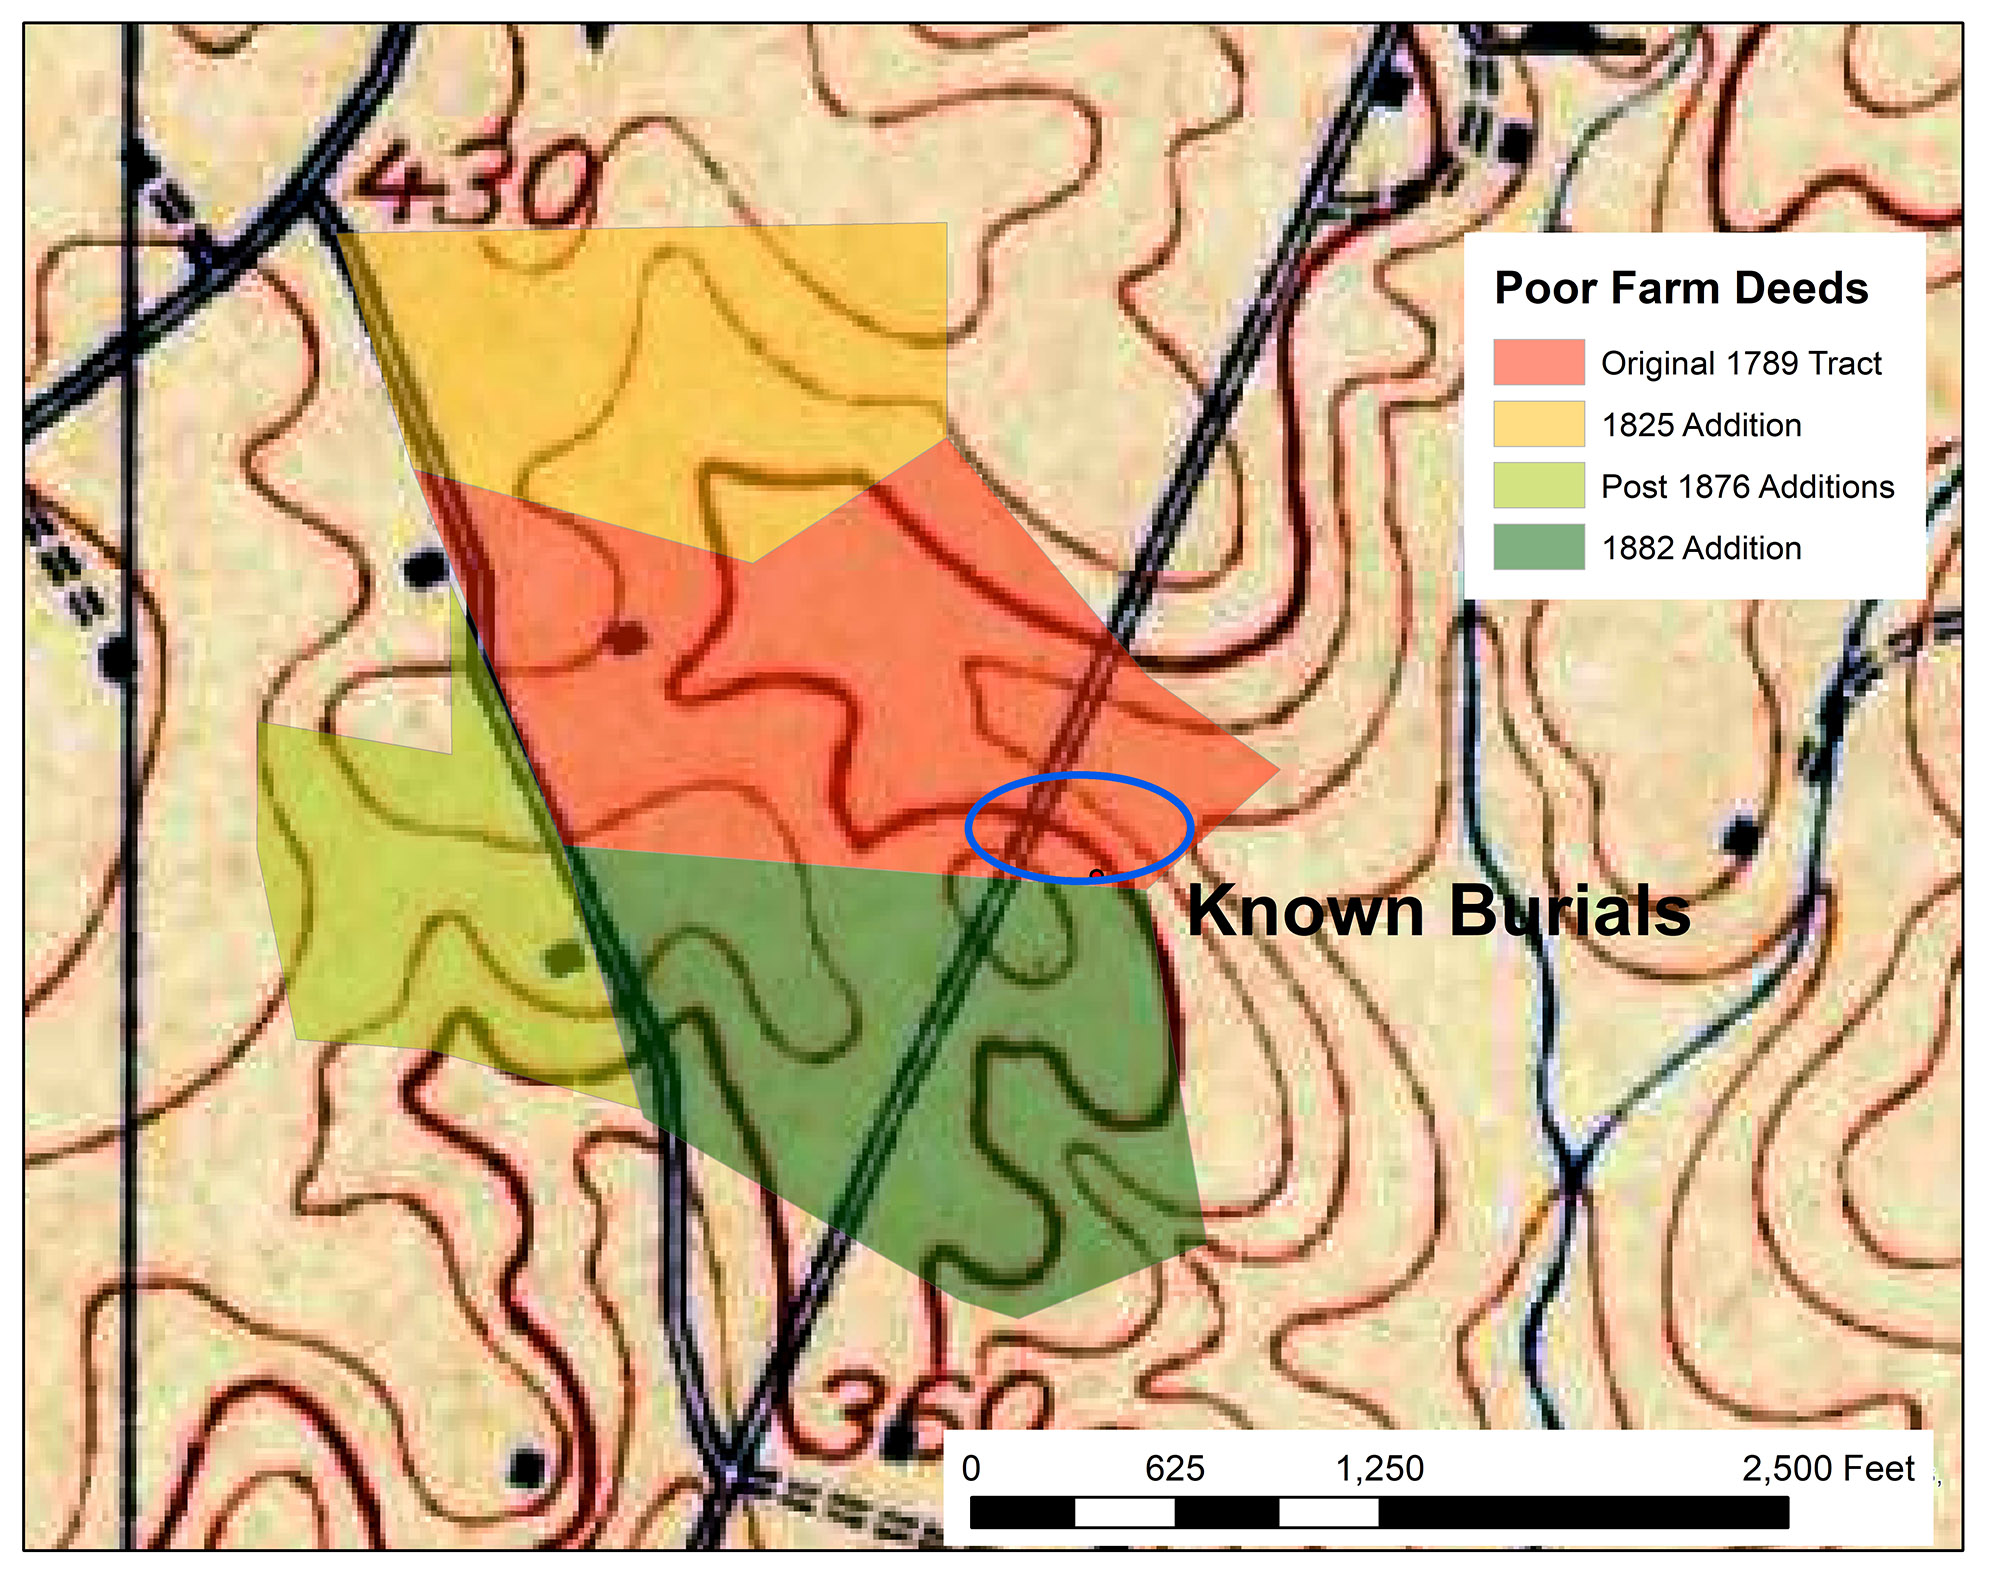 1908 Topographic map overlain with parcels purchased for the Poor Farm over the course of a century (color shaded areas) and the area where burials were found in 1987 (blue oval). The red region in the middle was the original tract purchased in 1789. The yellow tract north of the original tract was bought in 1825, the light green parcel to the west after 1876, and the dark green parcel south of the original tract in 1882. The cemetery was located along what was Monroe Street in Rockville.